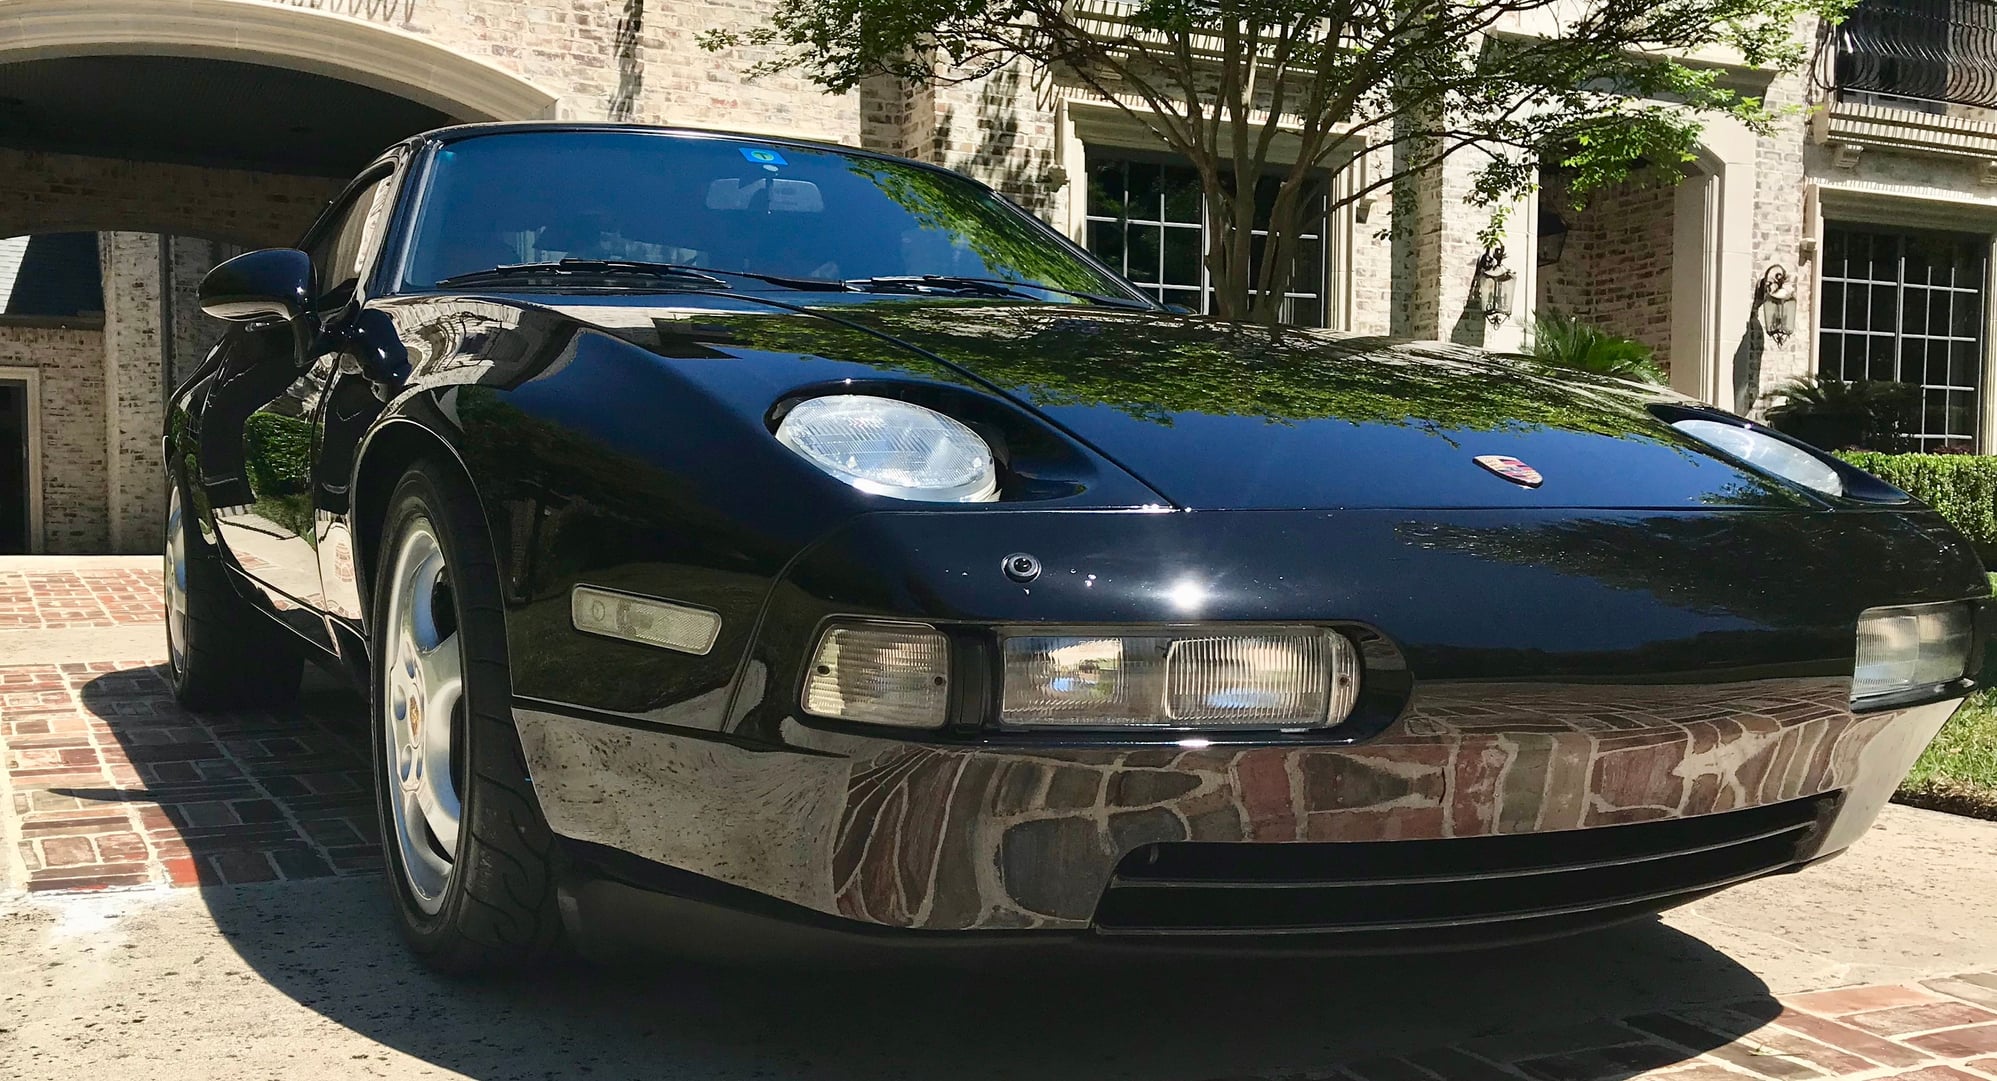 1994 Porsche 928 - 1994 928 GTS - Used - VIN WP0AA292XRS820072 - 56,300 Miles - 8 cyl - 2WD - Automatic - Coupe - Black - Dallas, TX 75230, United States